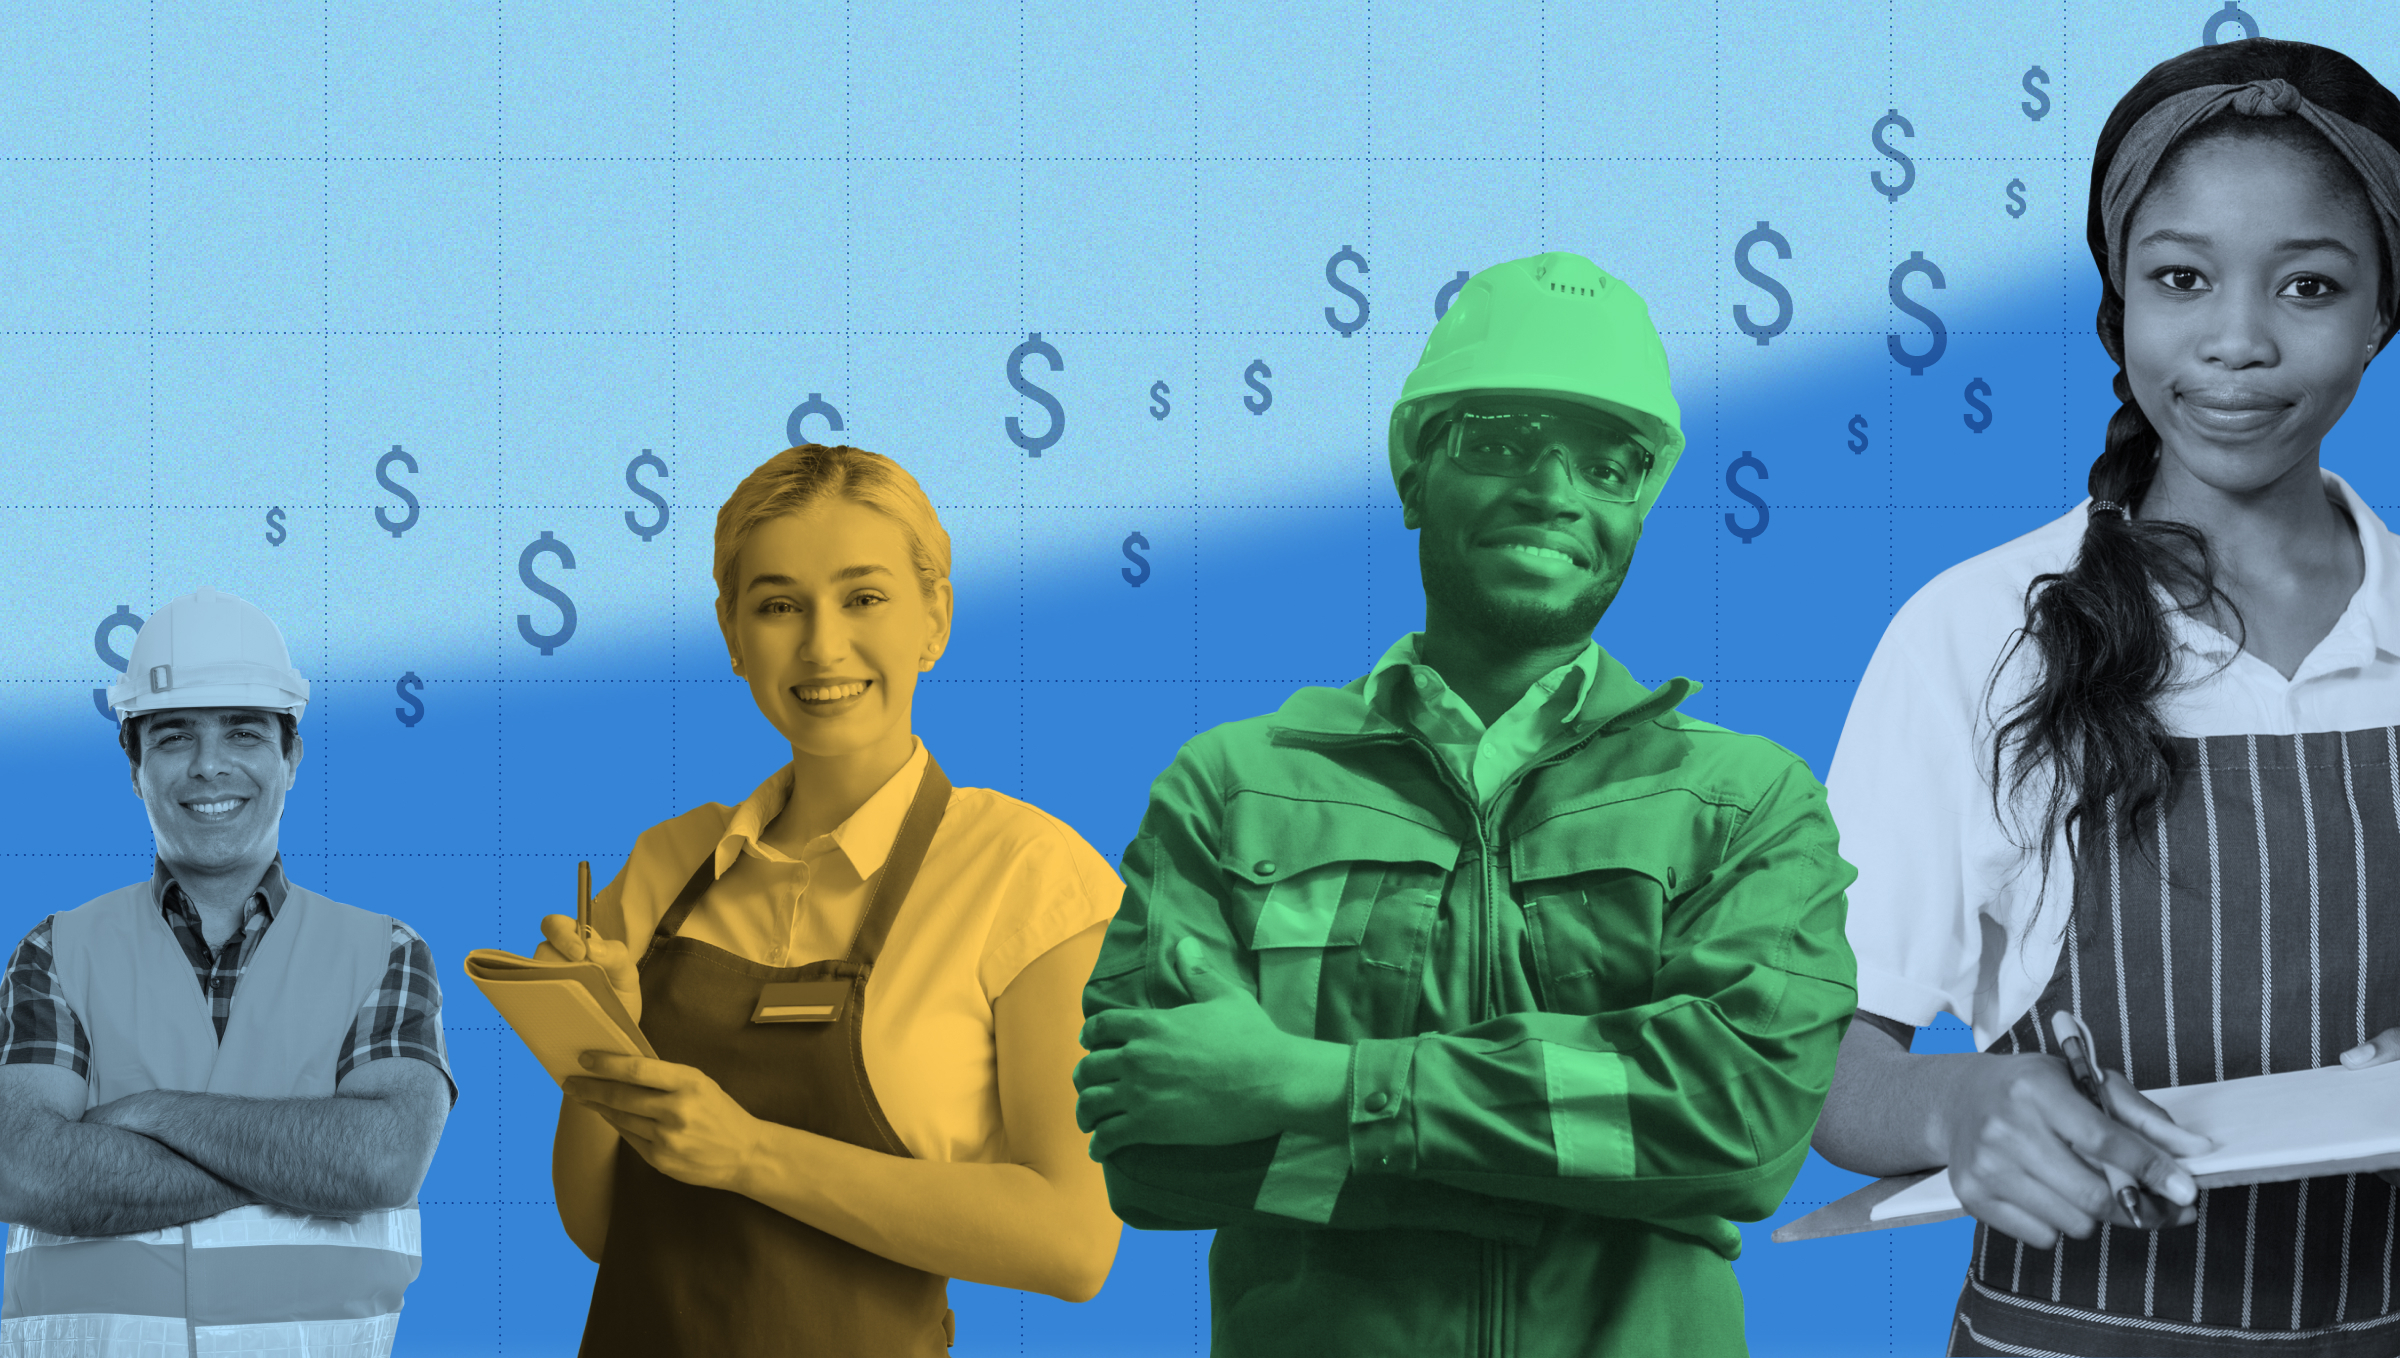 a photo illustration of a diverse group of workers wearing construction and restaurant uniforms and standing in front of a blue background decorated with dollar signs